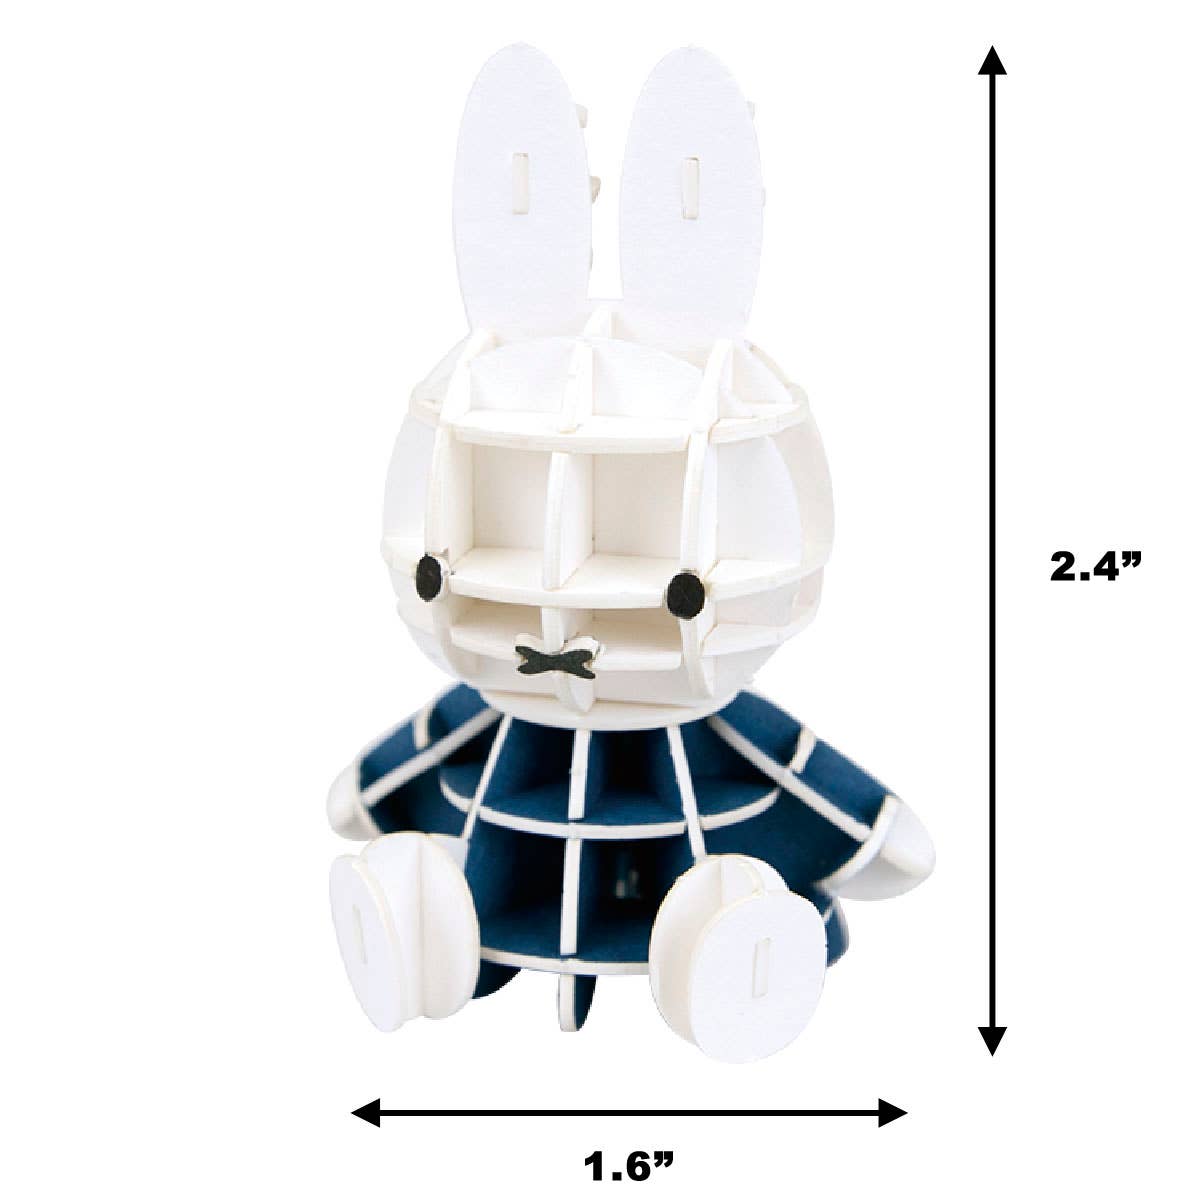 Miffy 3D Paper Puzzle, Sitting